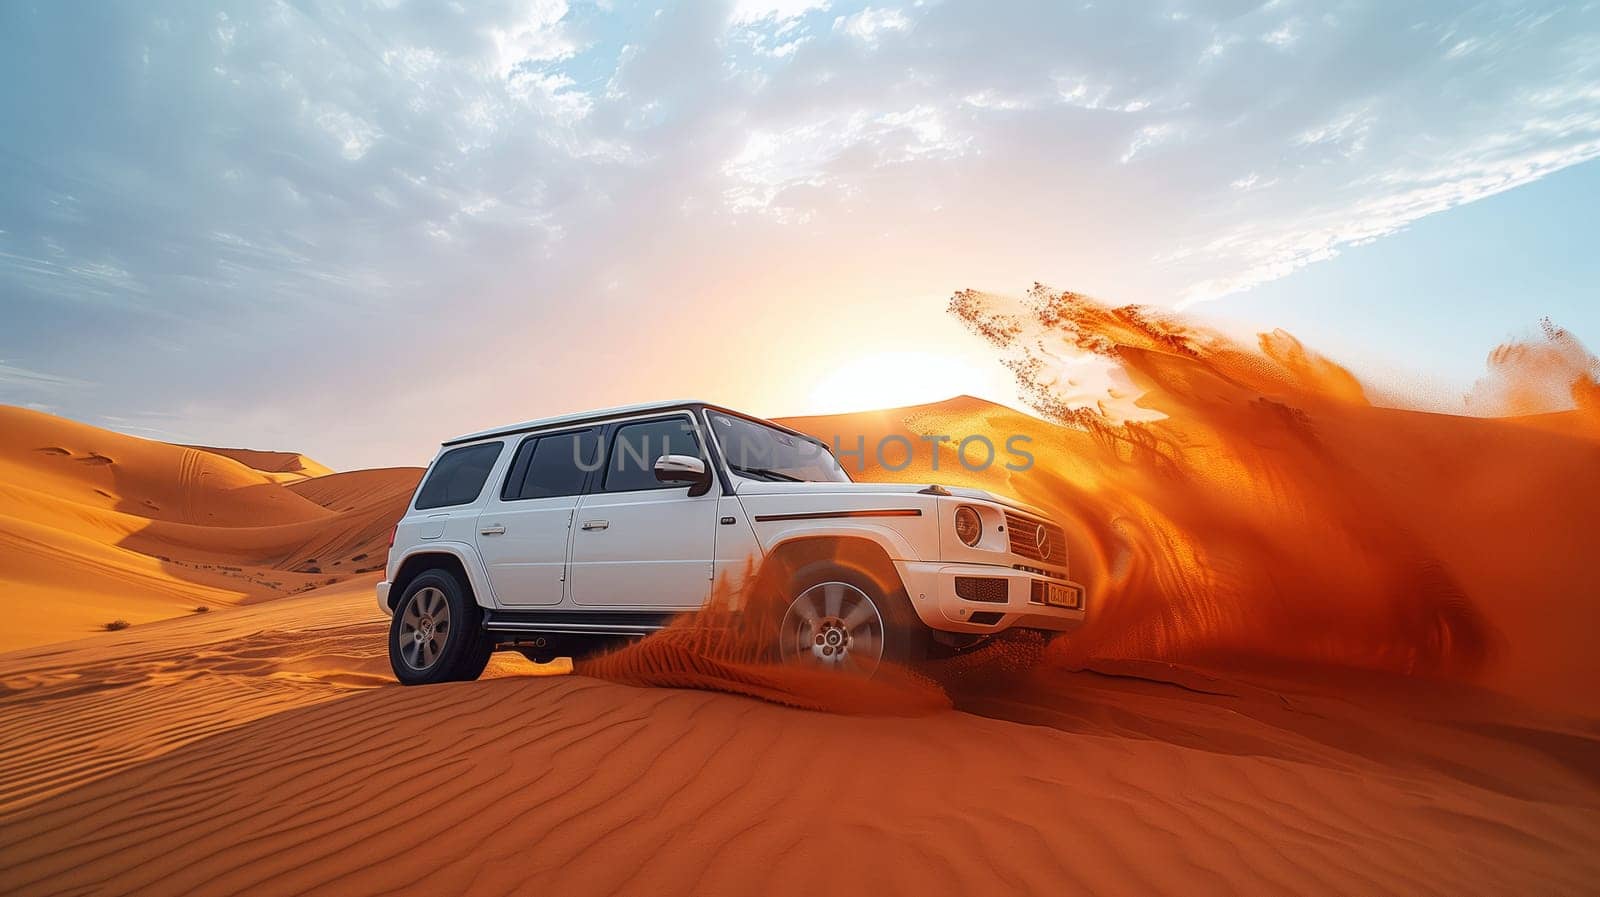 White SUV with tires rolling across sandy desert terrain by richwolf